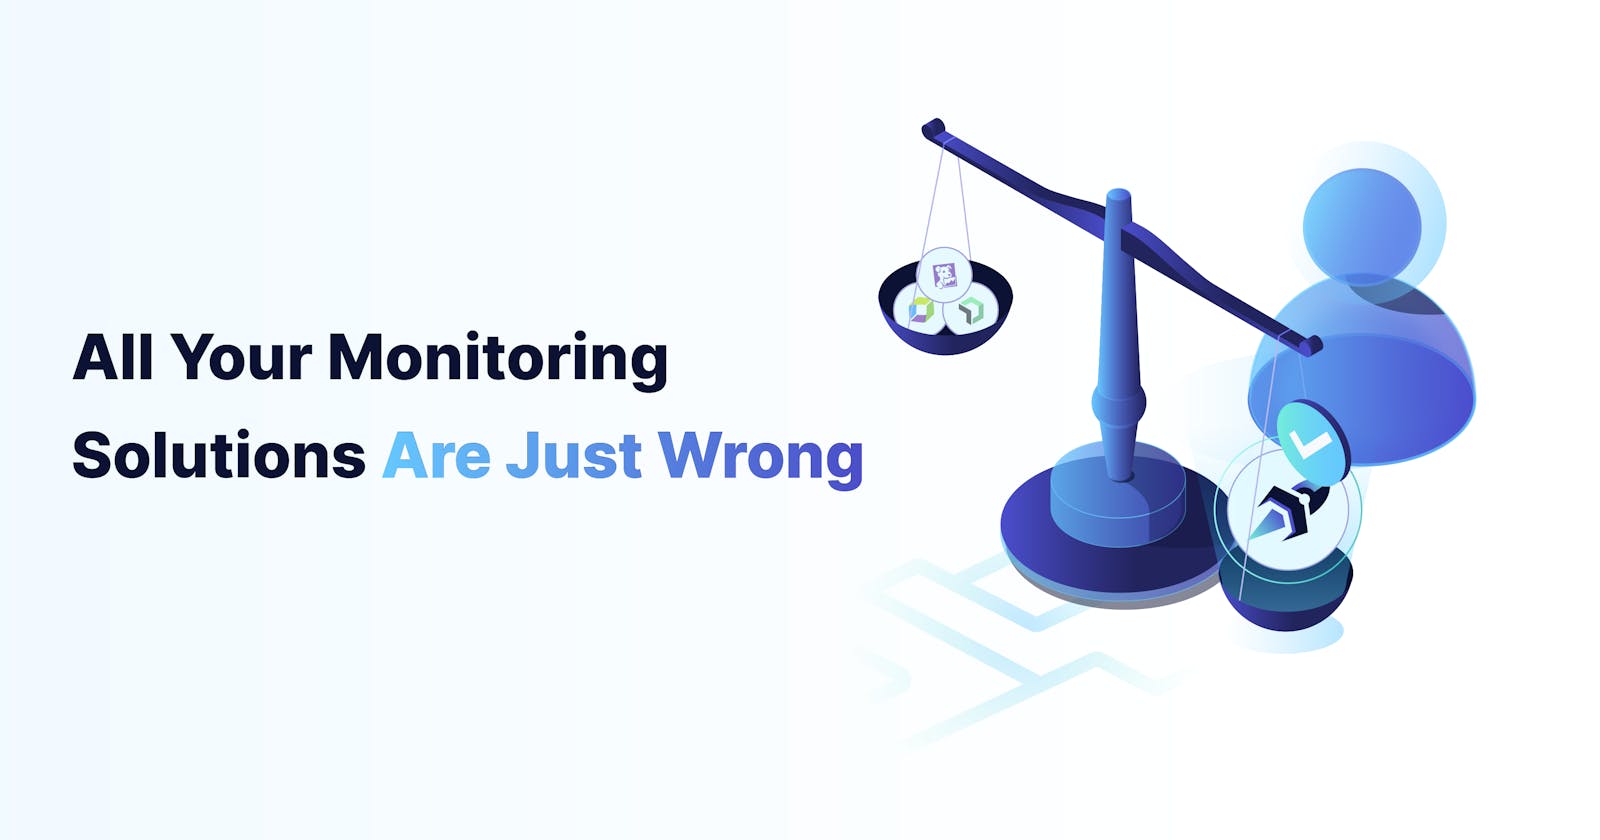 All Your Monitoring Solutions Are Just Wrong